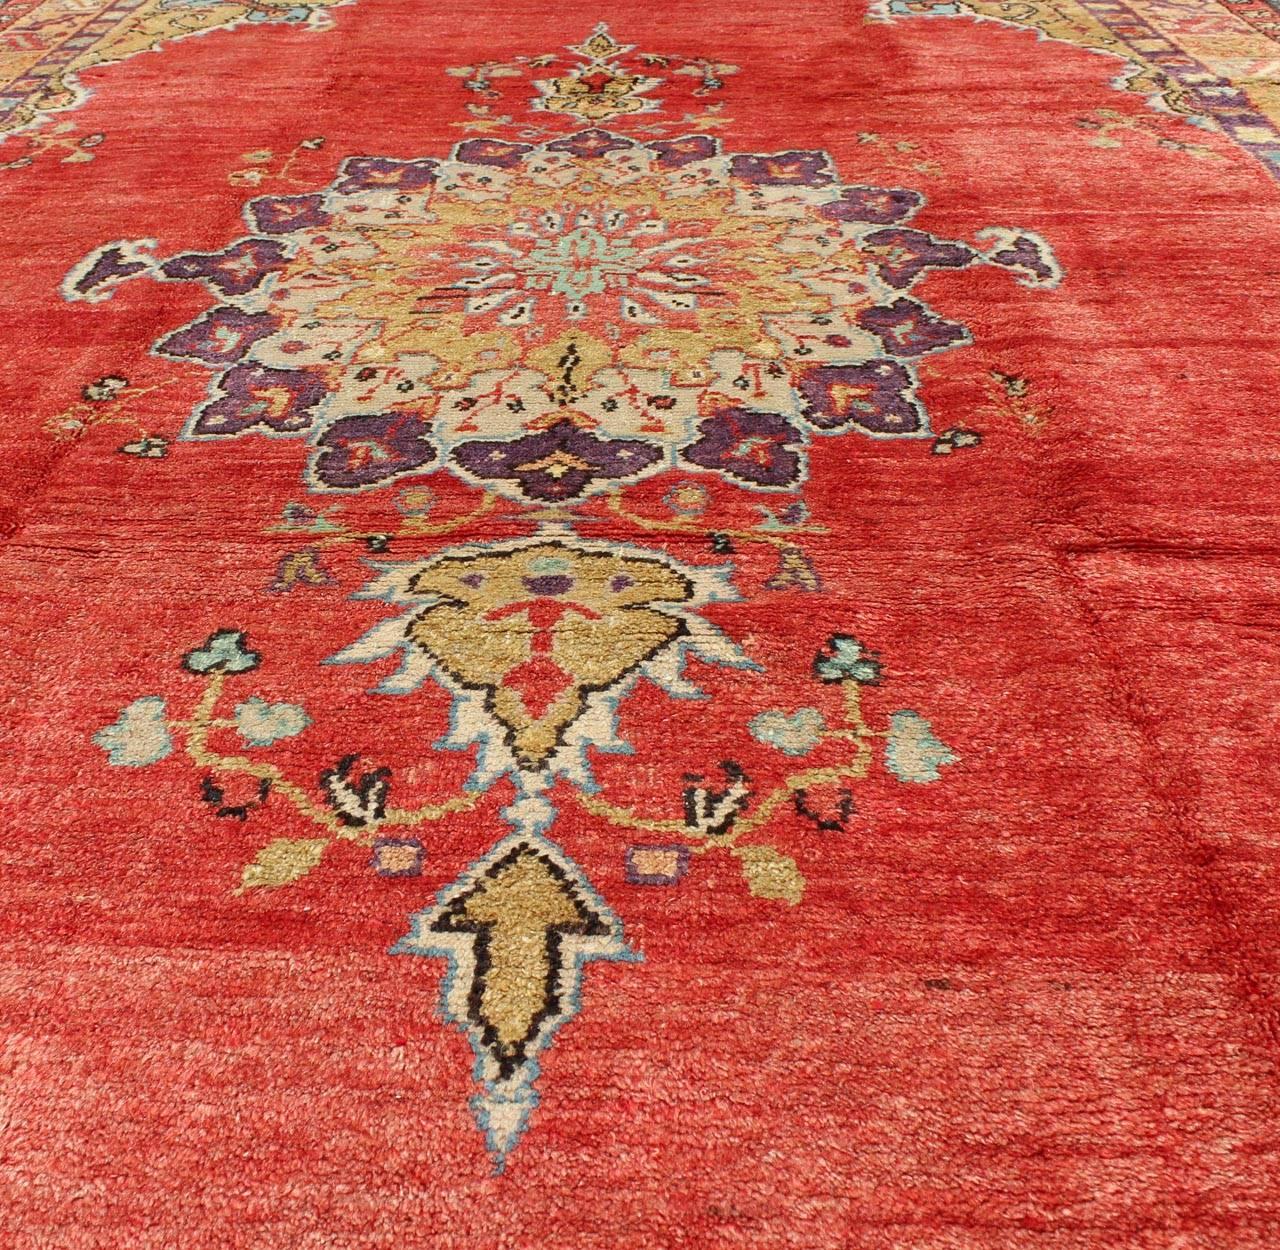 Colorful Vintage Turkish Oushak Rug with Red, Brown and Gold Colors 1